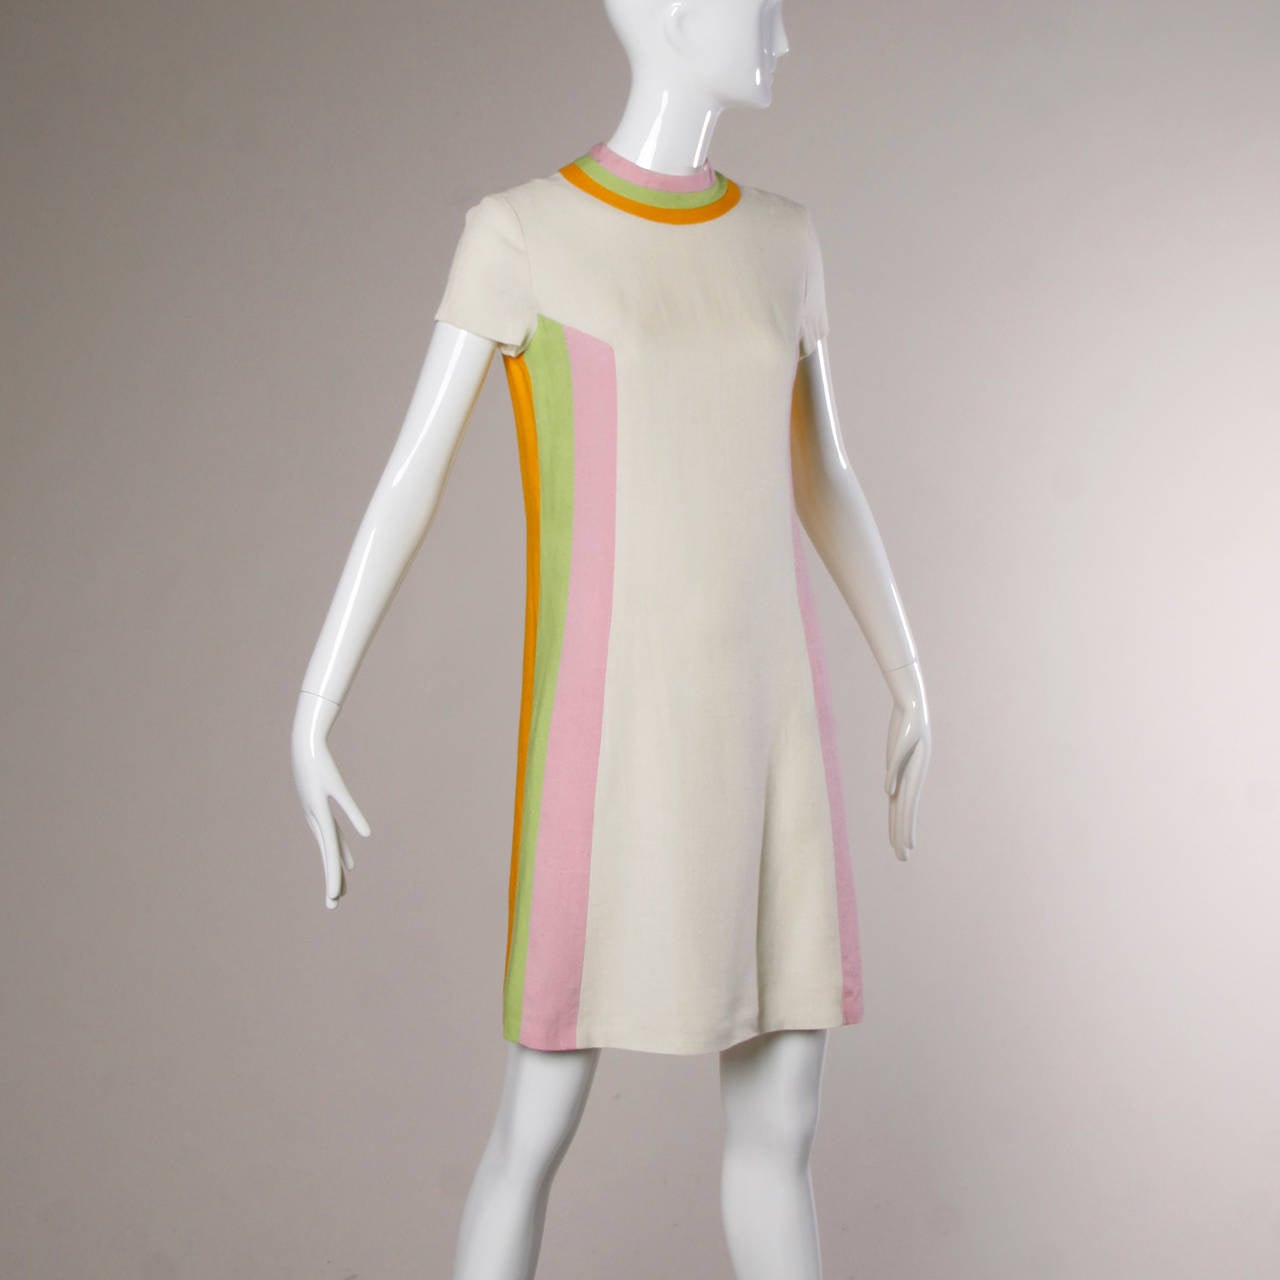 Darling vintage linen shift dress by Lord & Taylor with color blocking.

Details:

Fully Lined
Back Zip and Hook Closure
Marked Size: Not Marked
Estimated Size: Small
Color: Off White/ Pink Berry/ Lime Soda/ Orange Sherbert
Fabric: